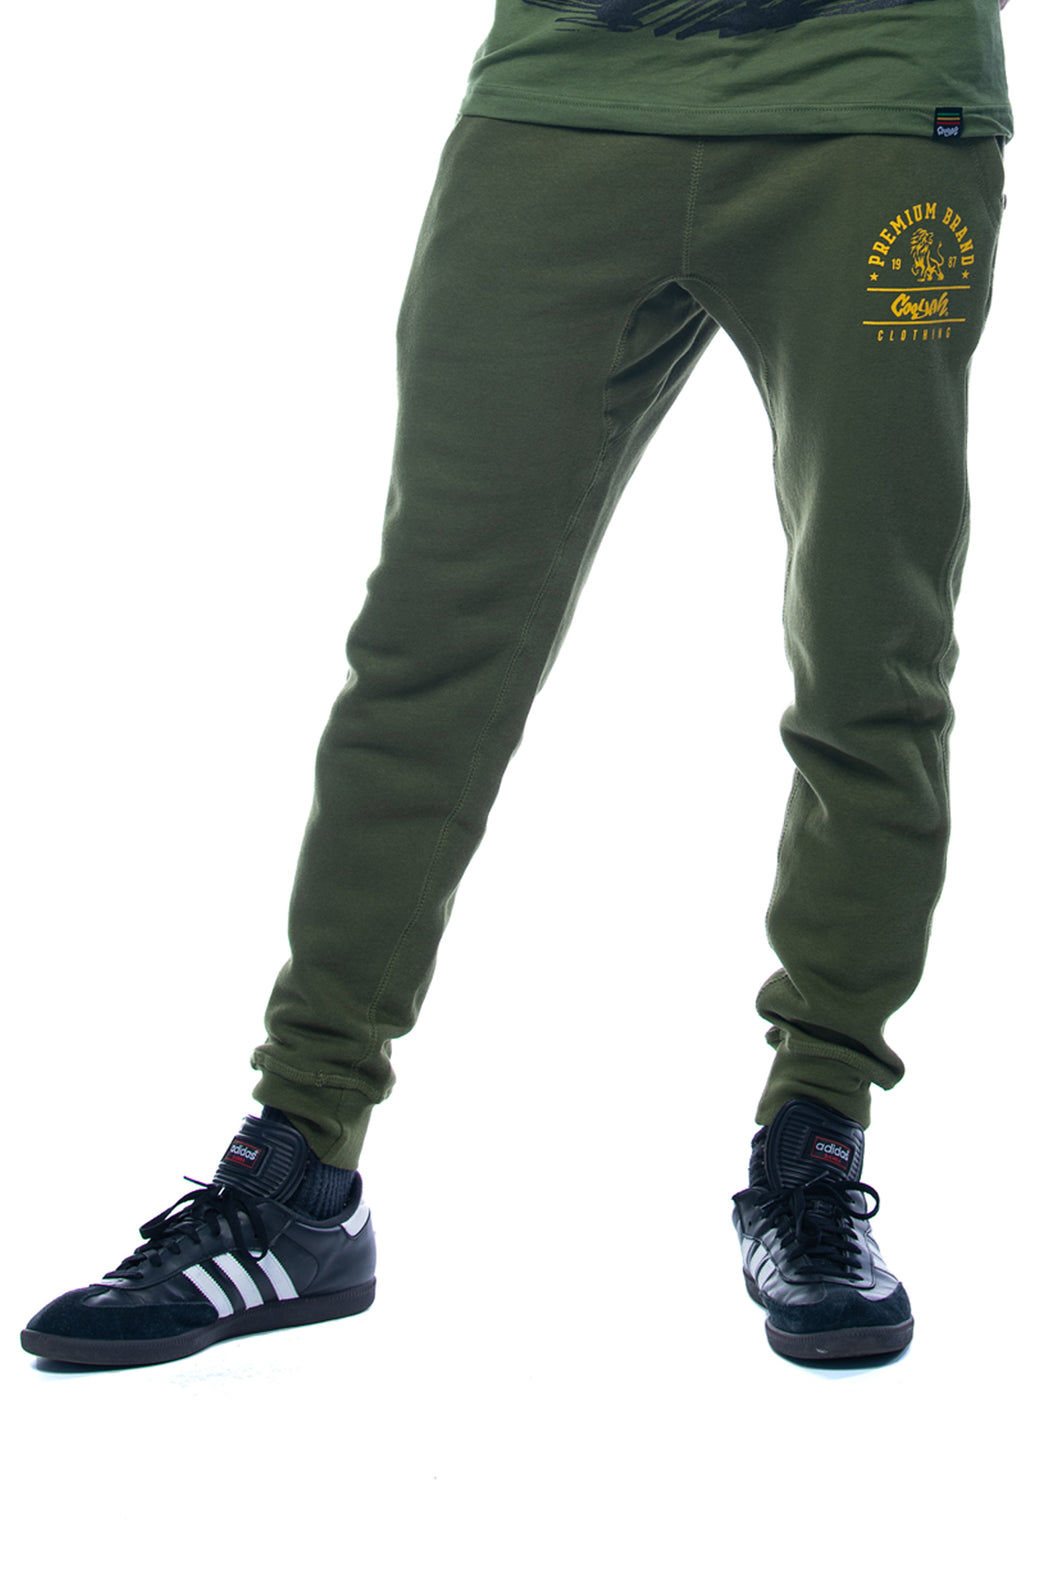 Cooyah Clothing.  Men's Premium Brand Joggers in green with Lion graphic.  Jamaican streetwear clothing brand.